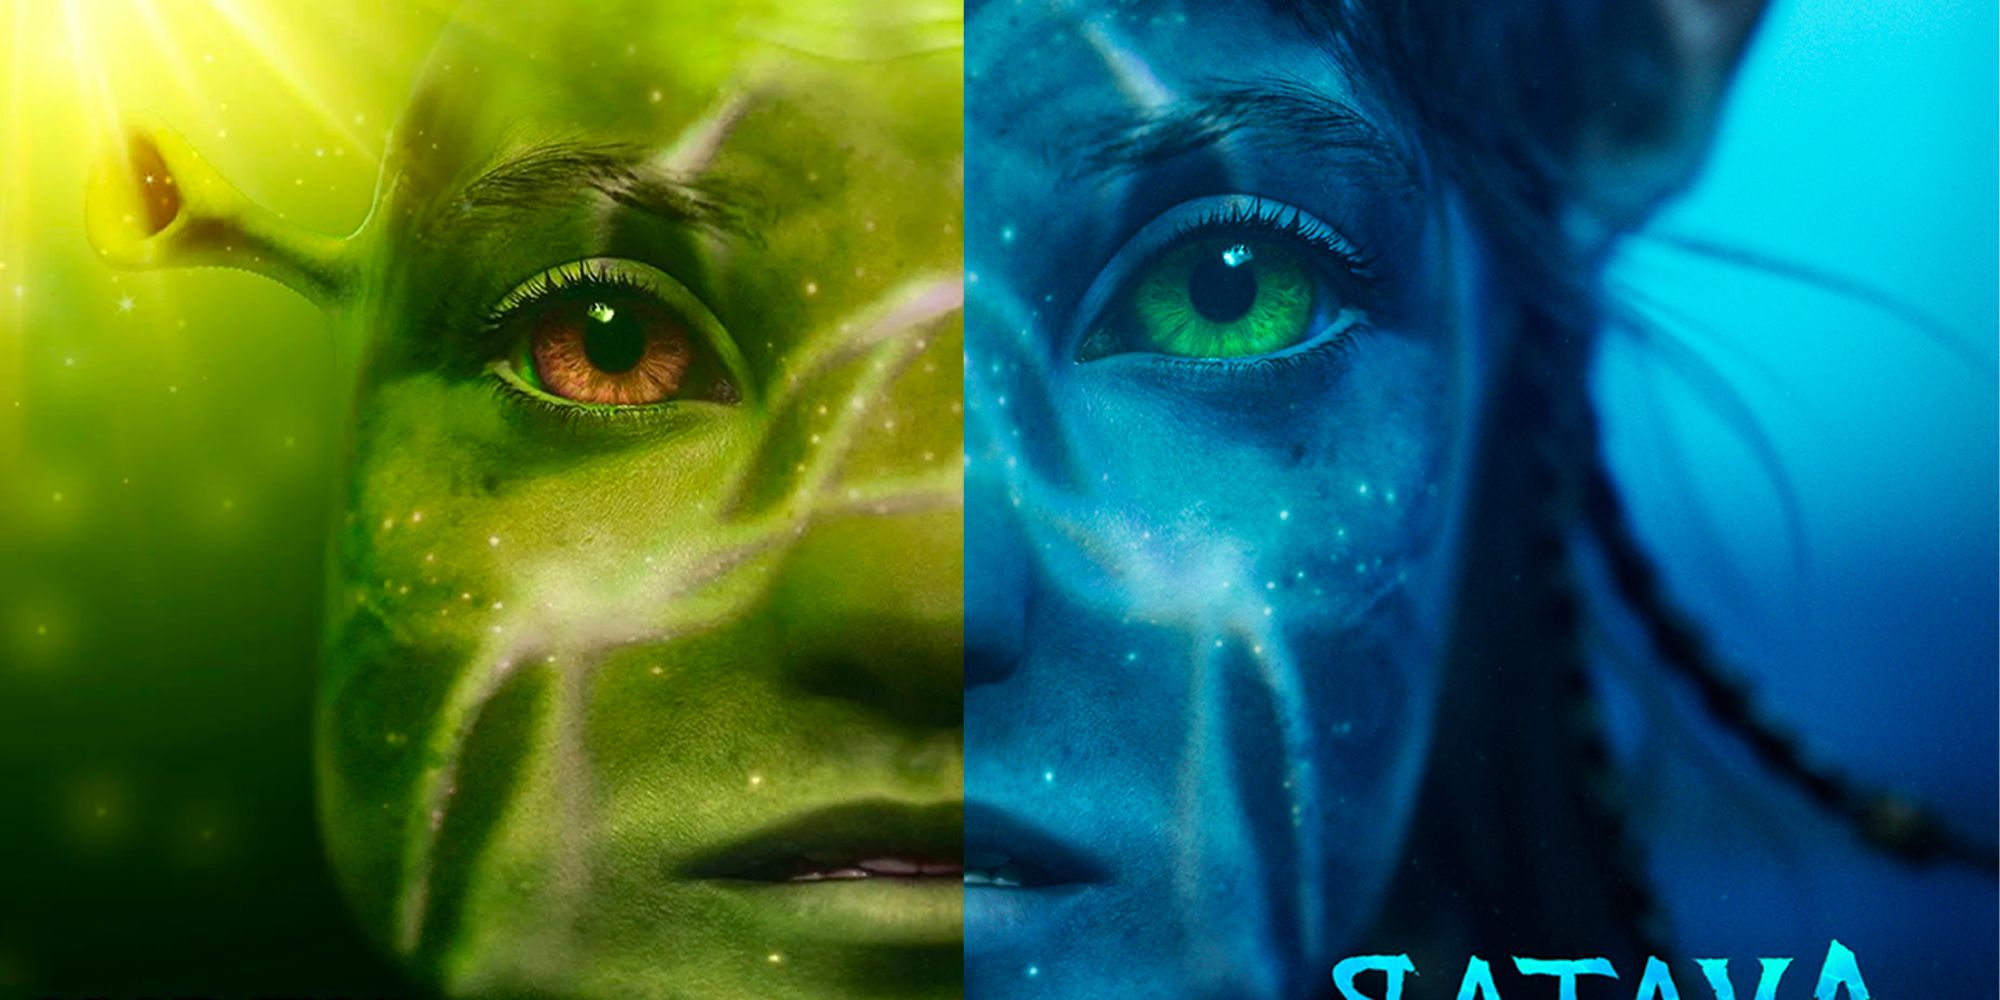 Avatar 2 Poster Is Perfect Way To Imagine Live-Action Shrek